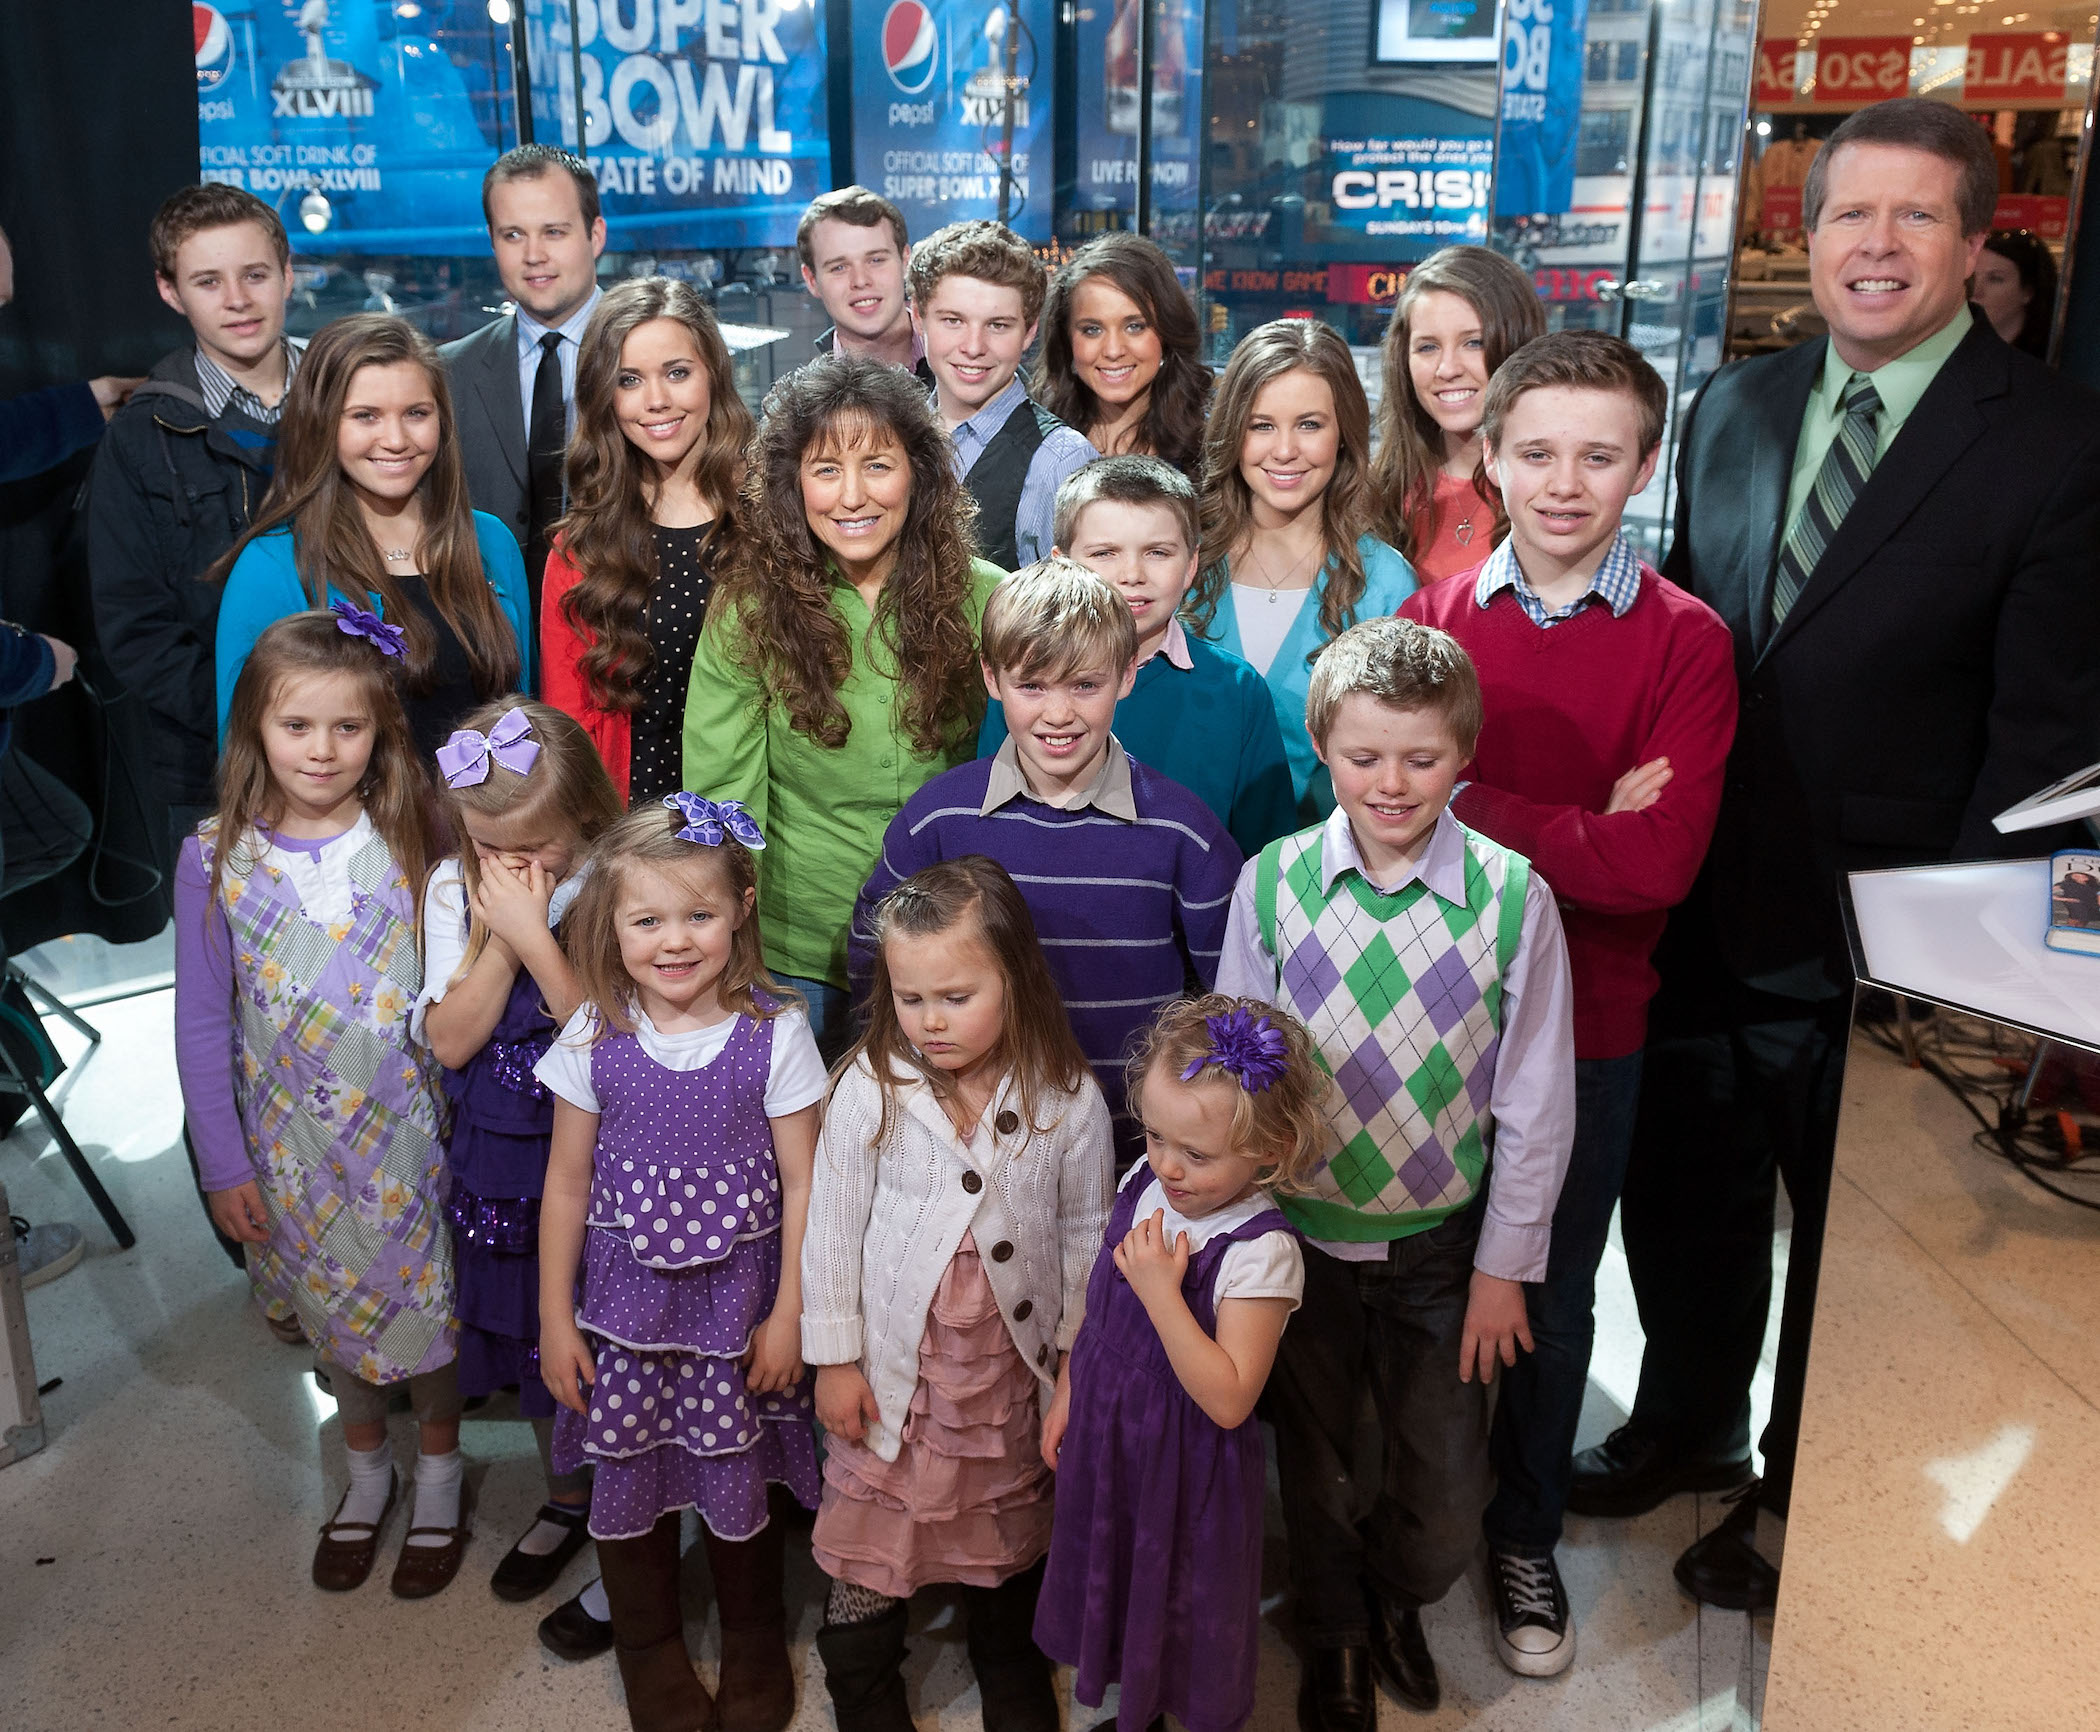 The Duggar family standing together and smiling at a camera